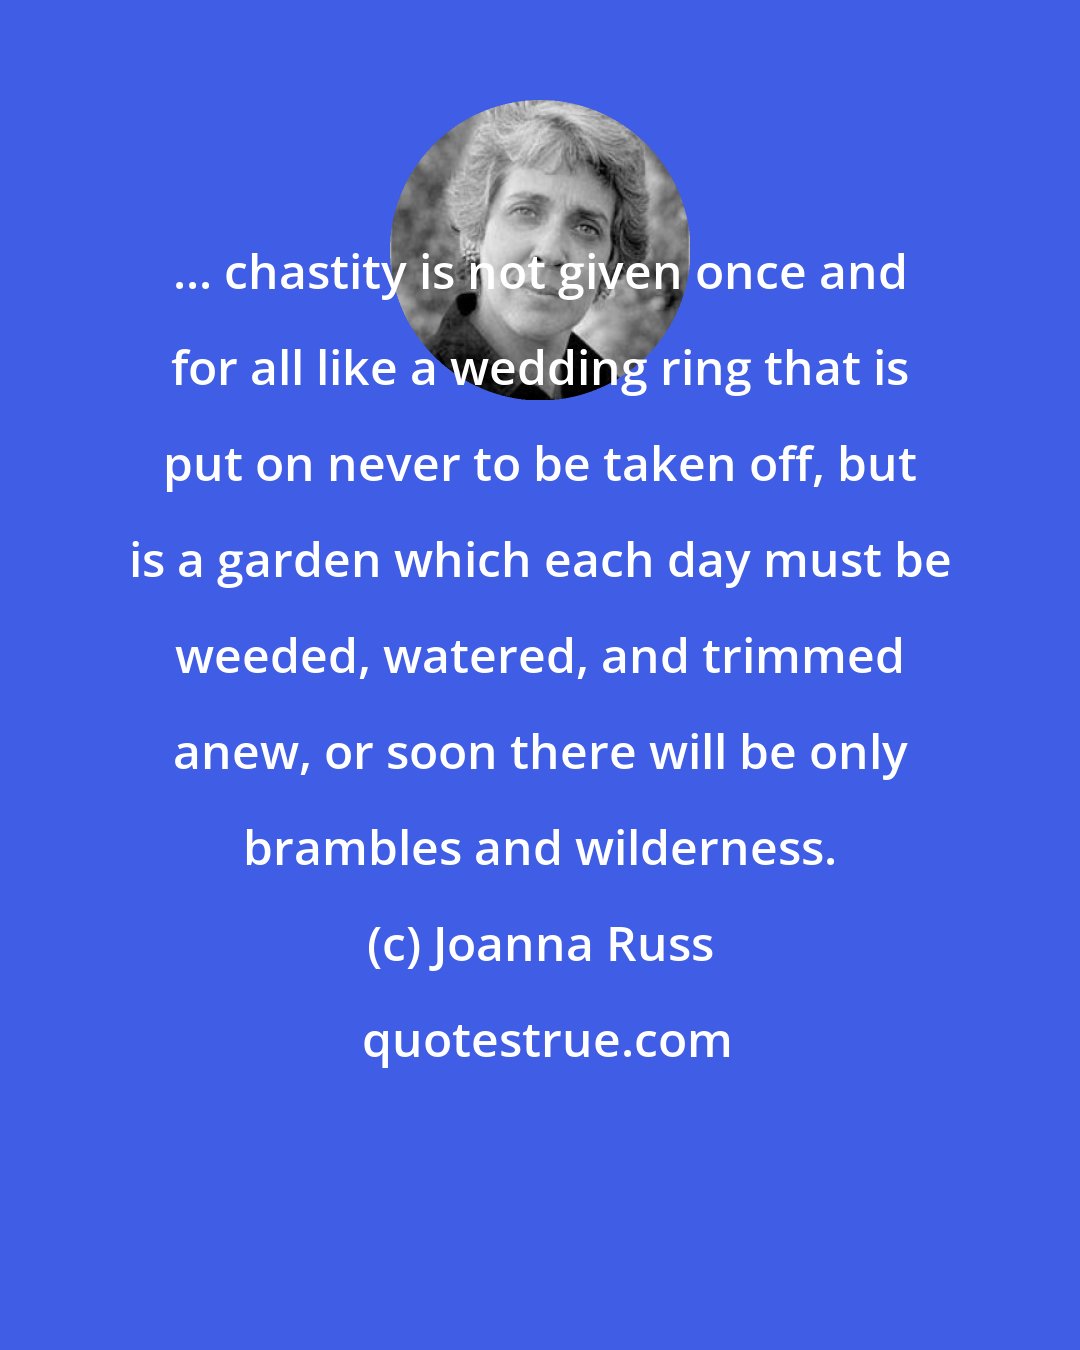 Joanna Russ: ... chastity is not given once and for all like a wedding ring that is put on never to be taken off, but is a garden which each day must be weeded, watered, and trimmed anew, or soon there will be only brambles and wilderness.